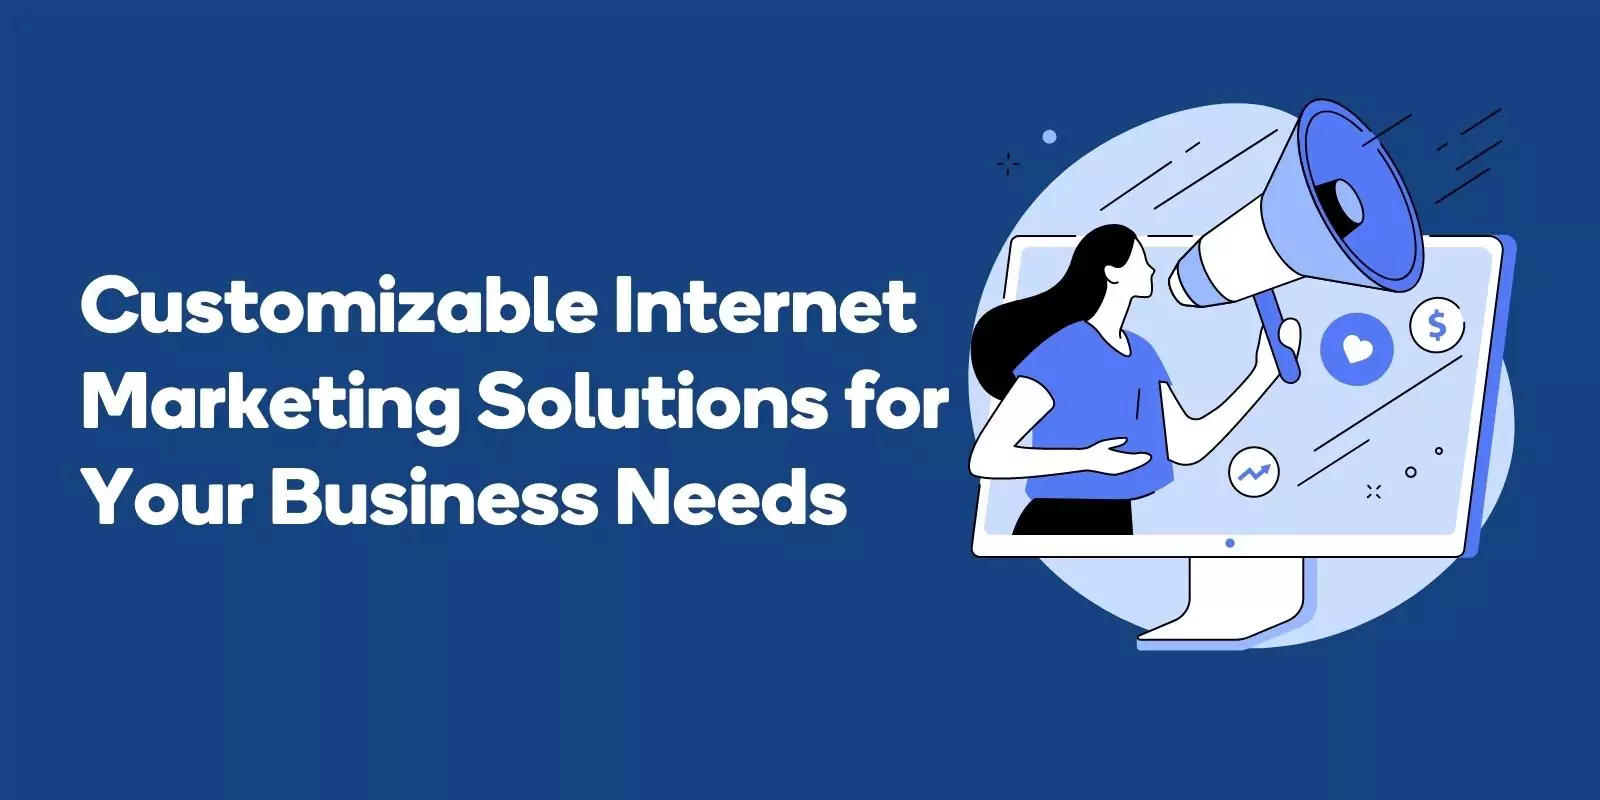 Customizable Internet Marketing Solutions for Your Business Needs